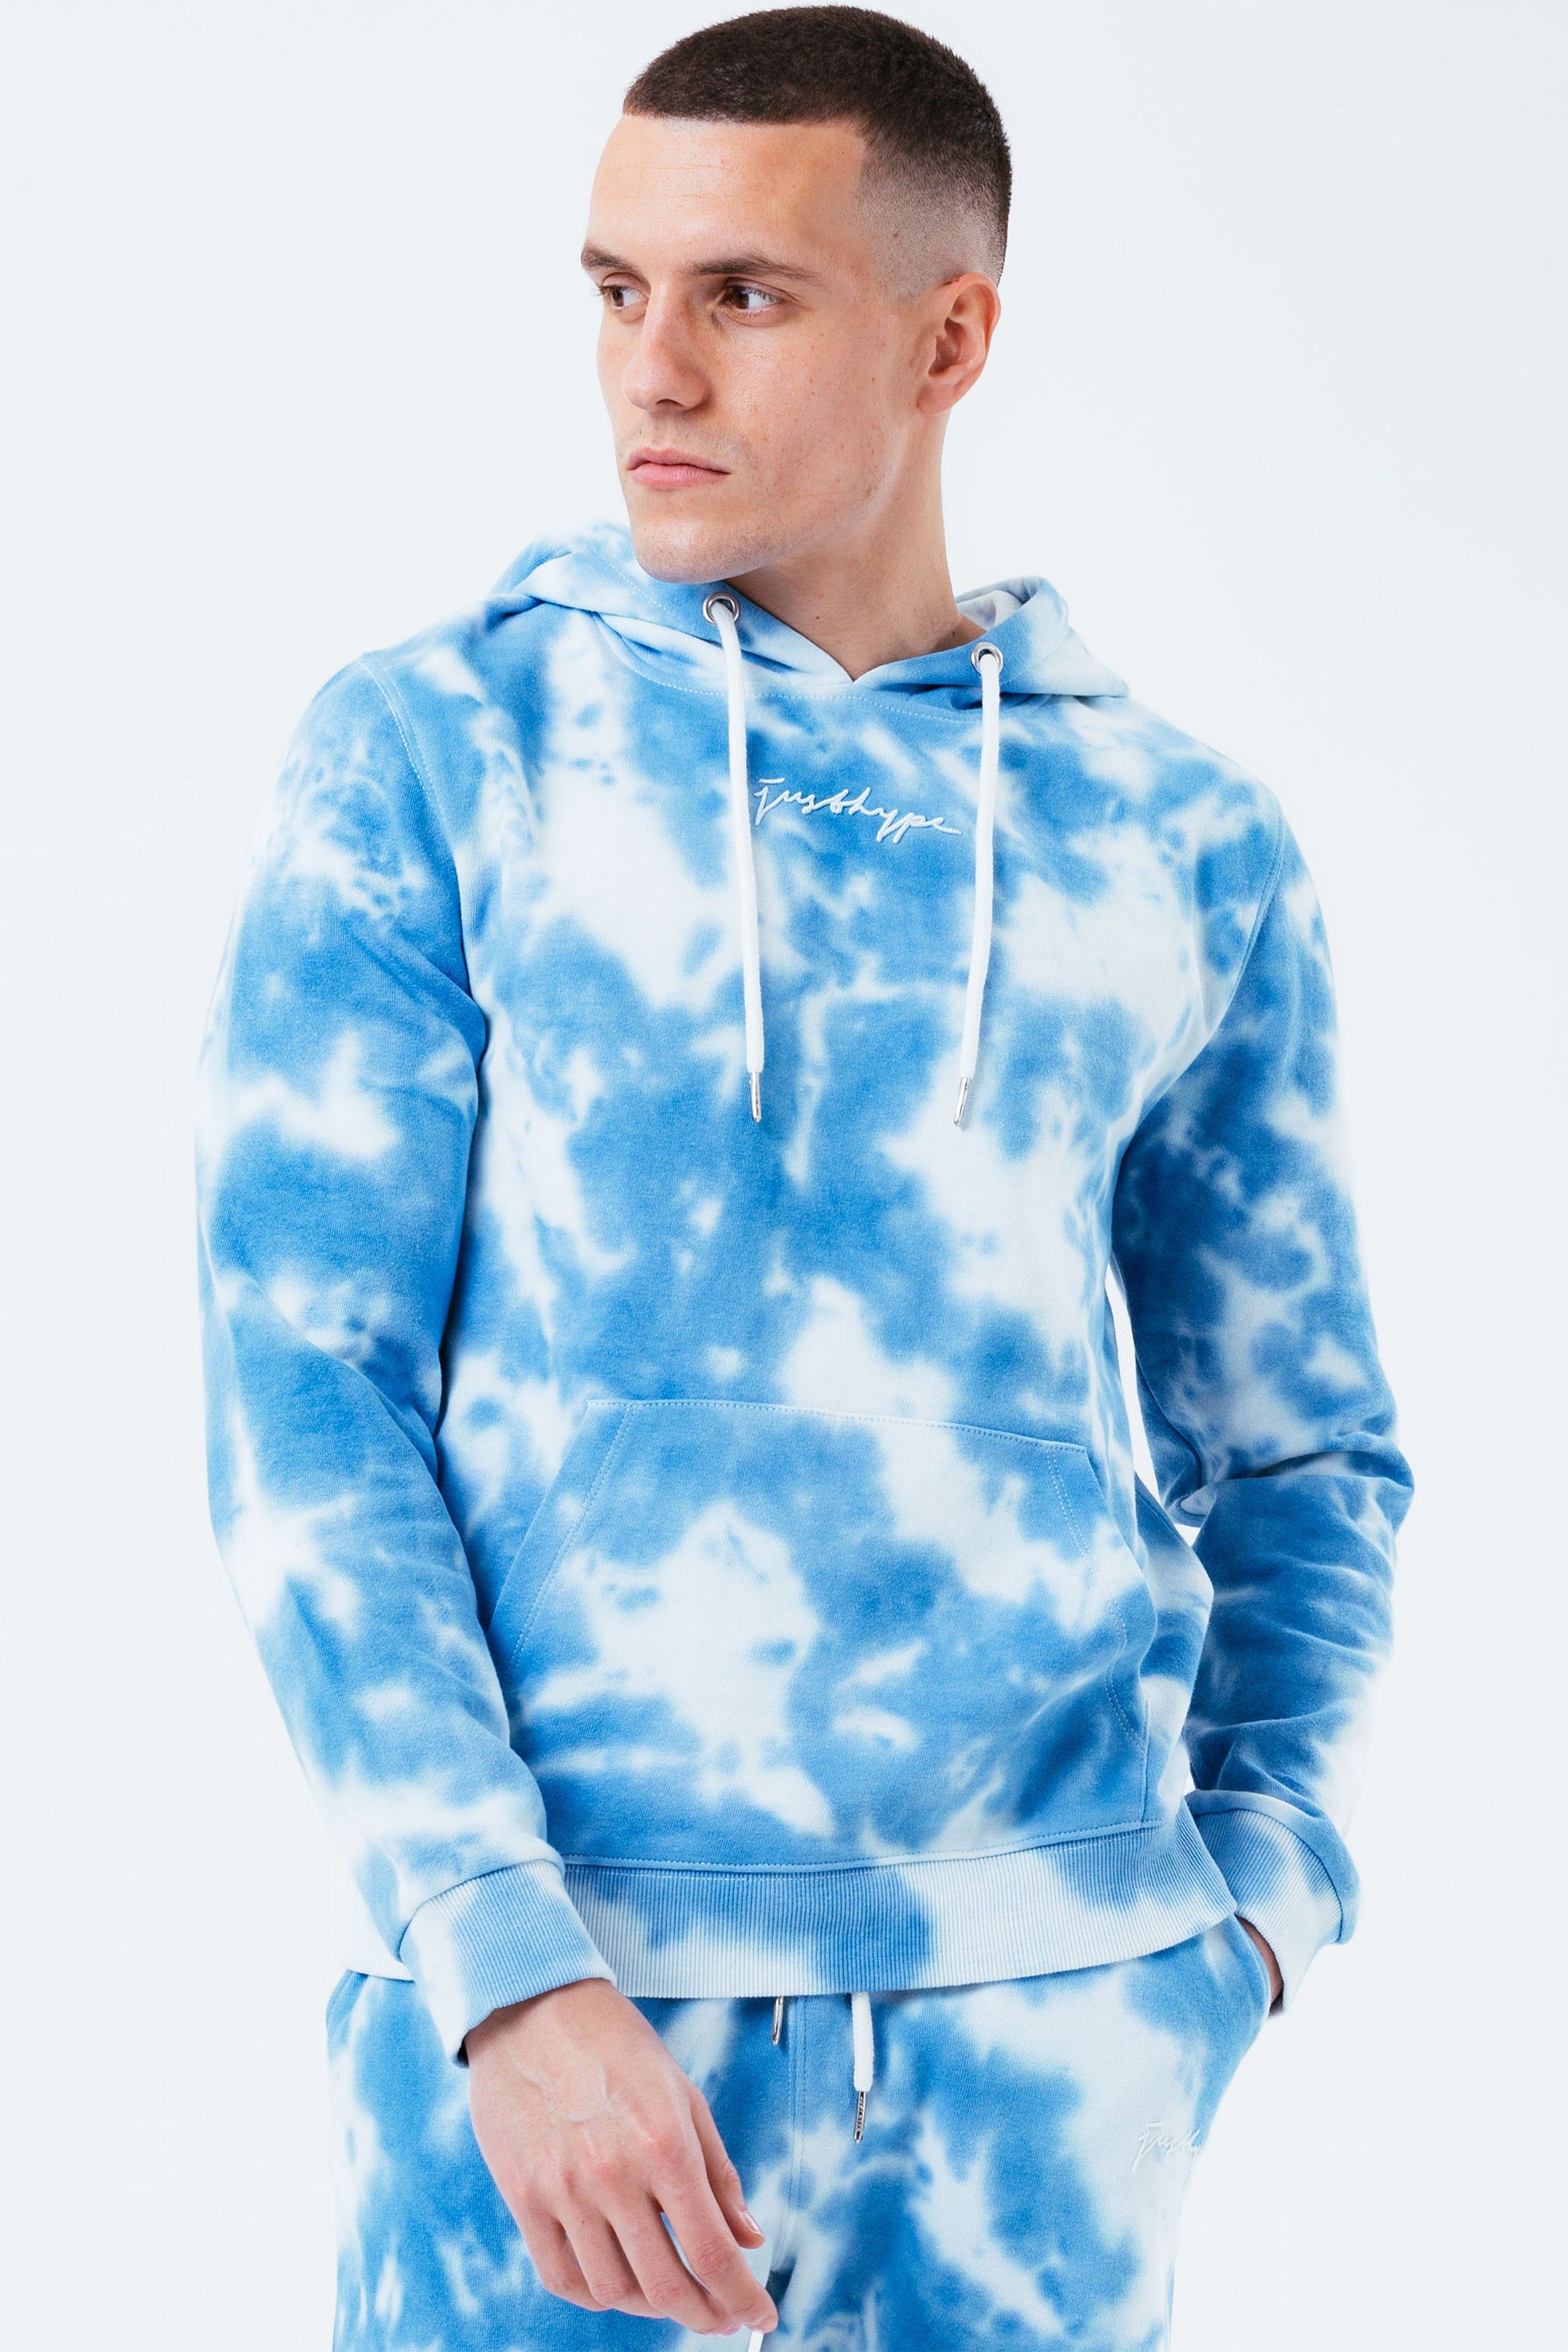 Stay on trend with the Hype Navy Tie Dye Scribble Logo Men's Pullover Hoodie and grab the matching joggers to complete the set. Designed in a 70% Cotton 30% Polyester soft-touch fabric with the supreme amount of comfort you need from your new pullover. Finished with fitted hem and cuffs, kangaroo pocket and hood. Machine wash at 30 degrees.